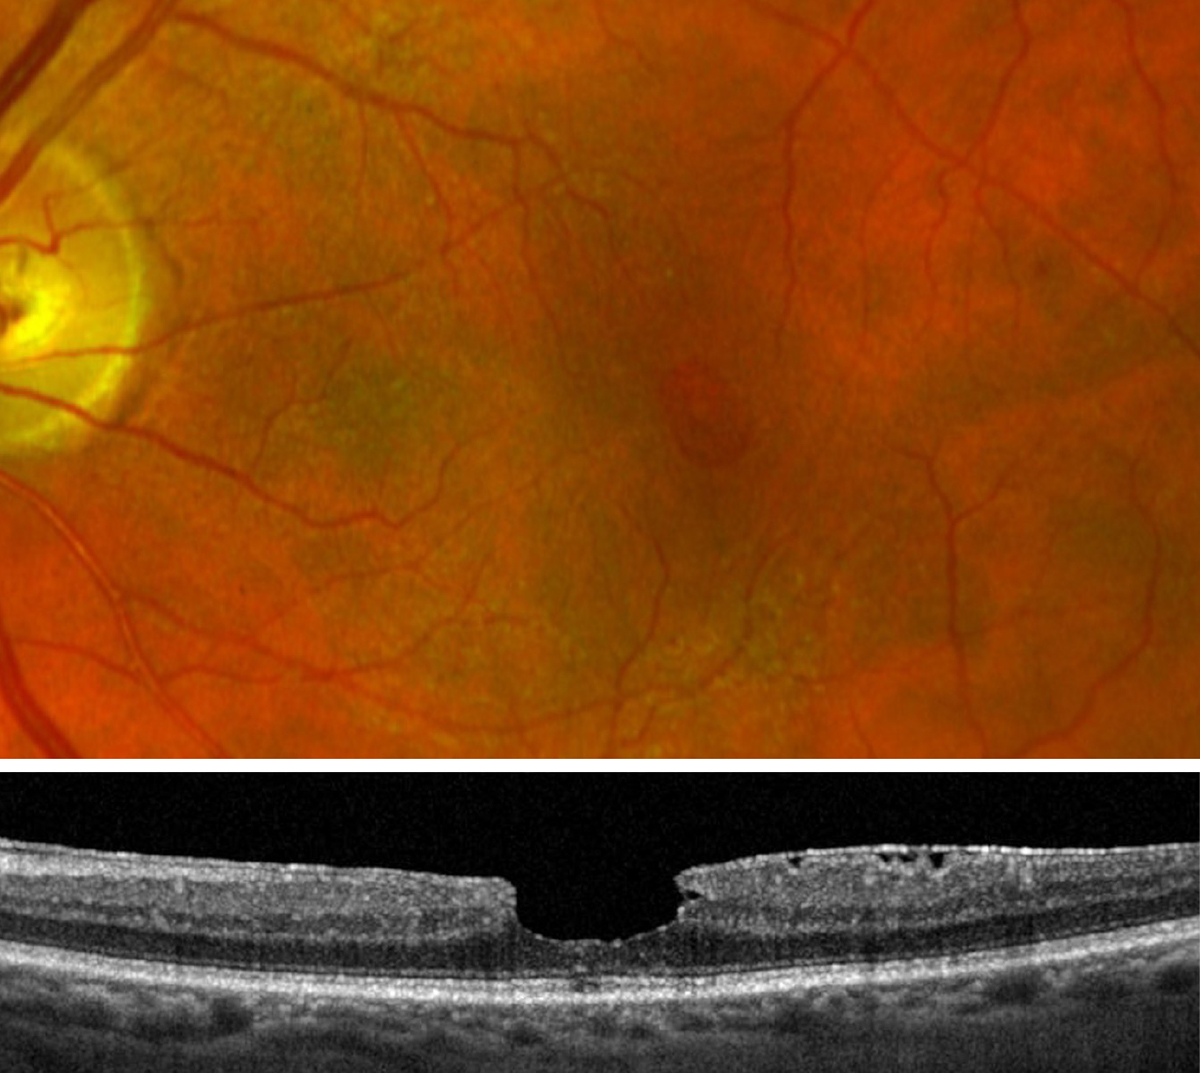 The chatbot provided interpretations of ophthalmic images beyond information explicitly stated in the source database in some instances. One case presented to it and discussed in the journal article was macular pseudohole.